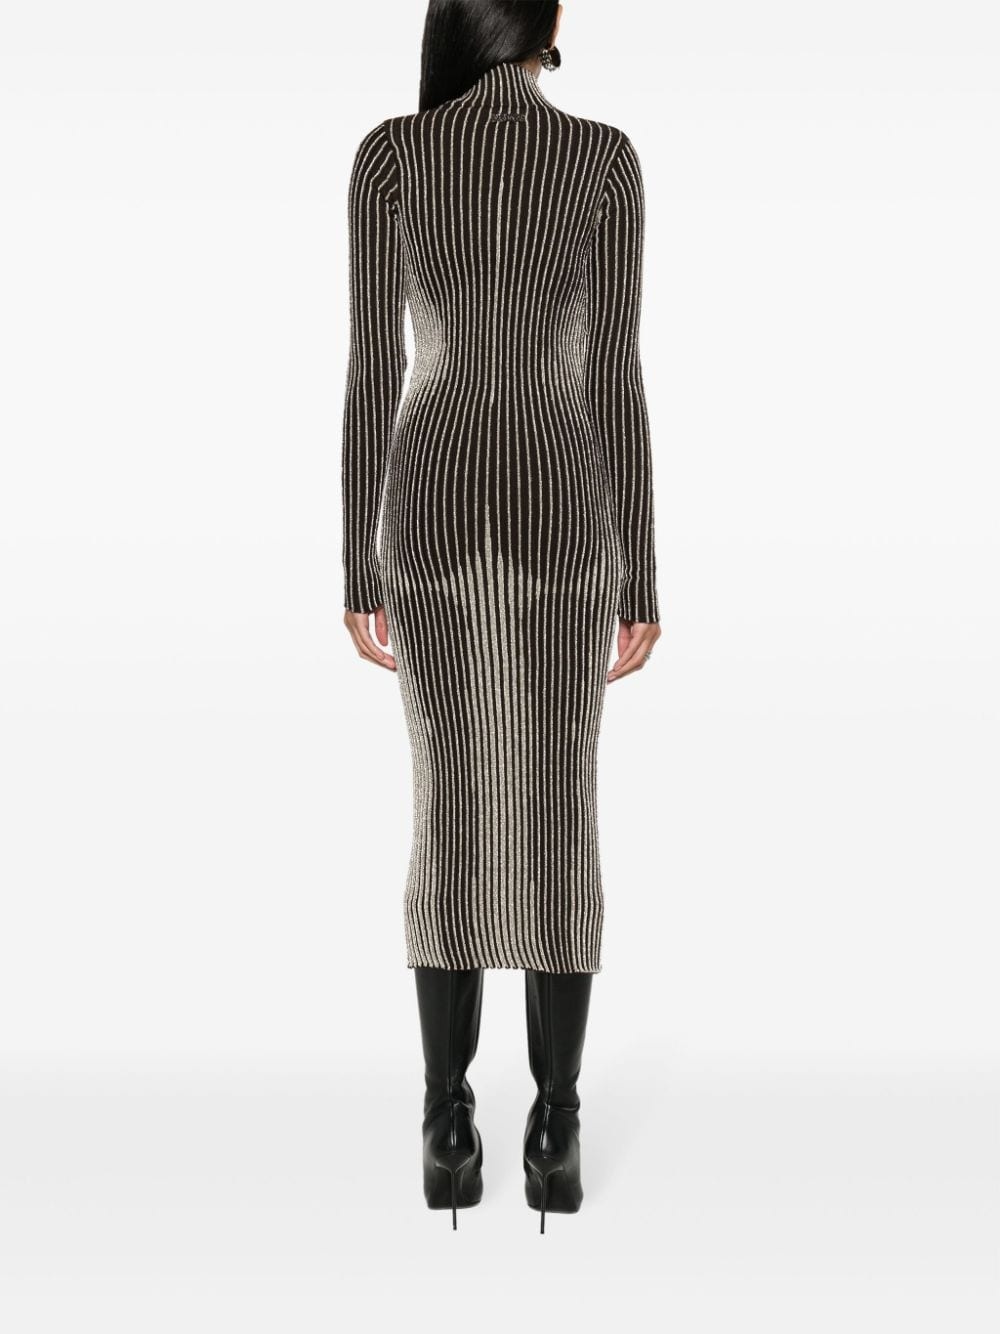 The Body Morphing knitted dress - 4